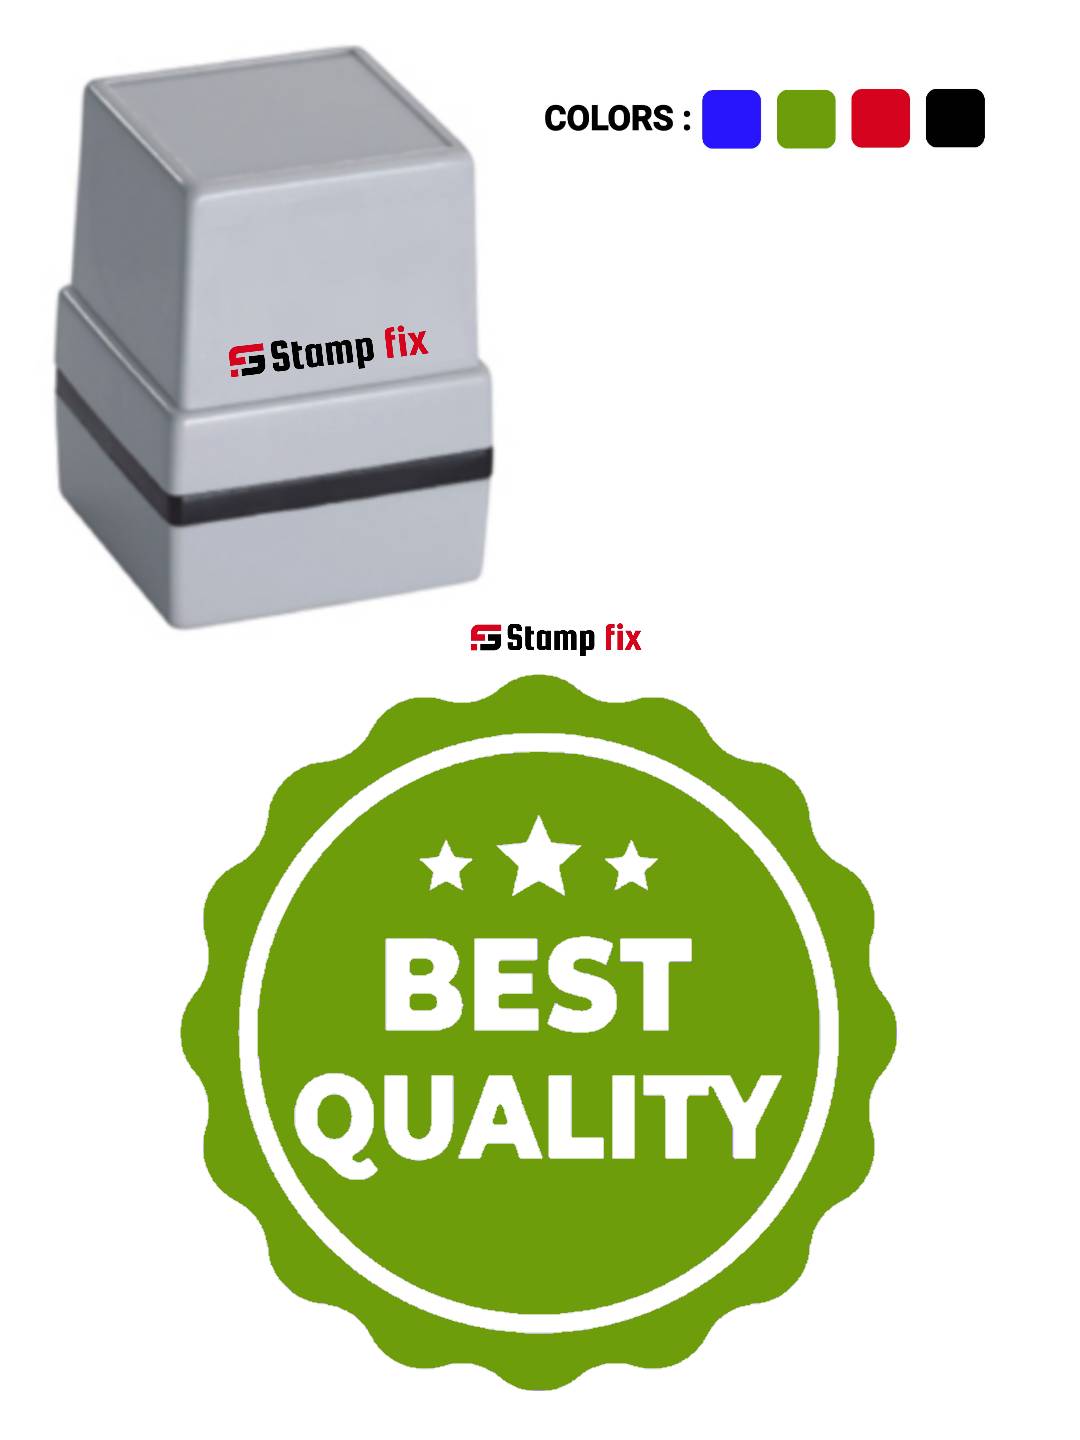 Pre Ink Best Quality Stamp by StampFix, a self-inking stamp with high-quality impressions
in India, nylon stamp, rubber stamp, pre ink stamp, polymer stamp, urgent stamp